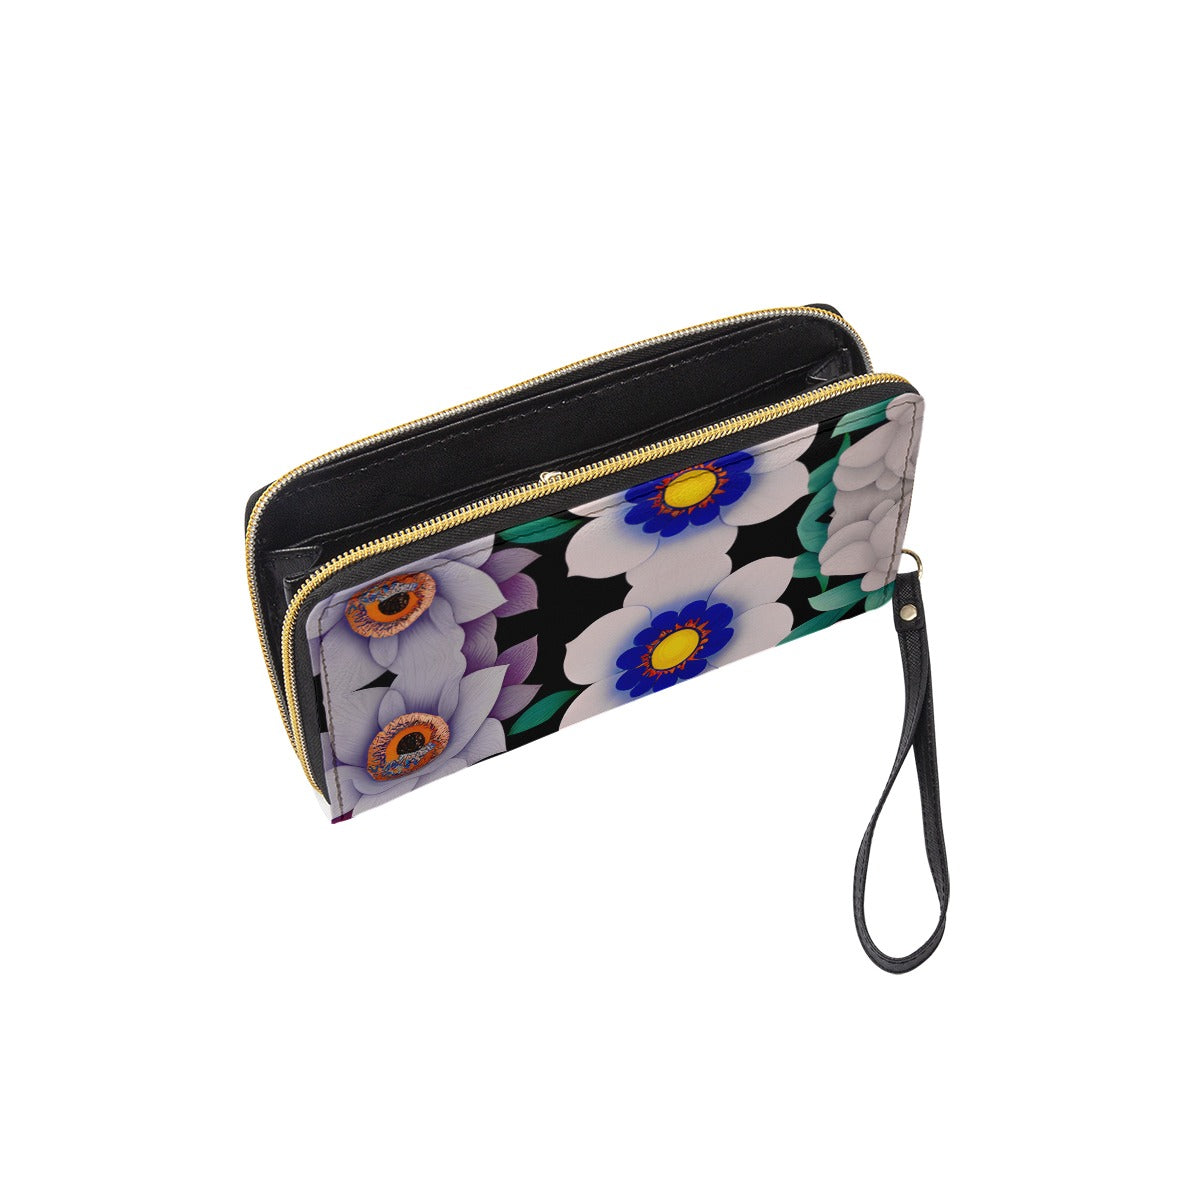 DNA GIRL USA Long Wallet With Strap